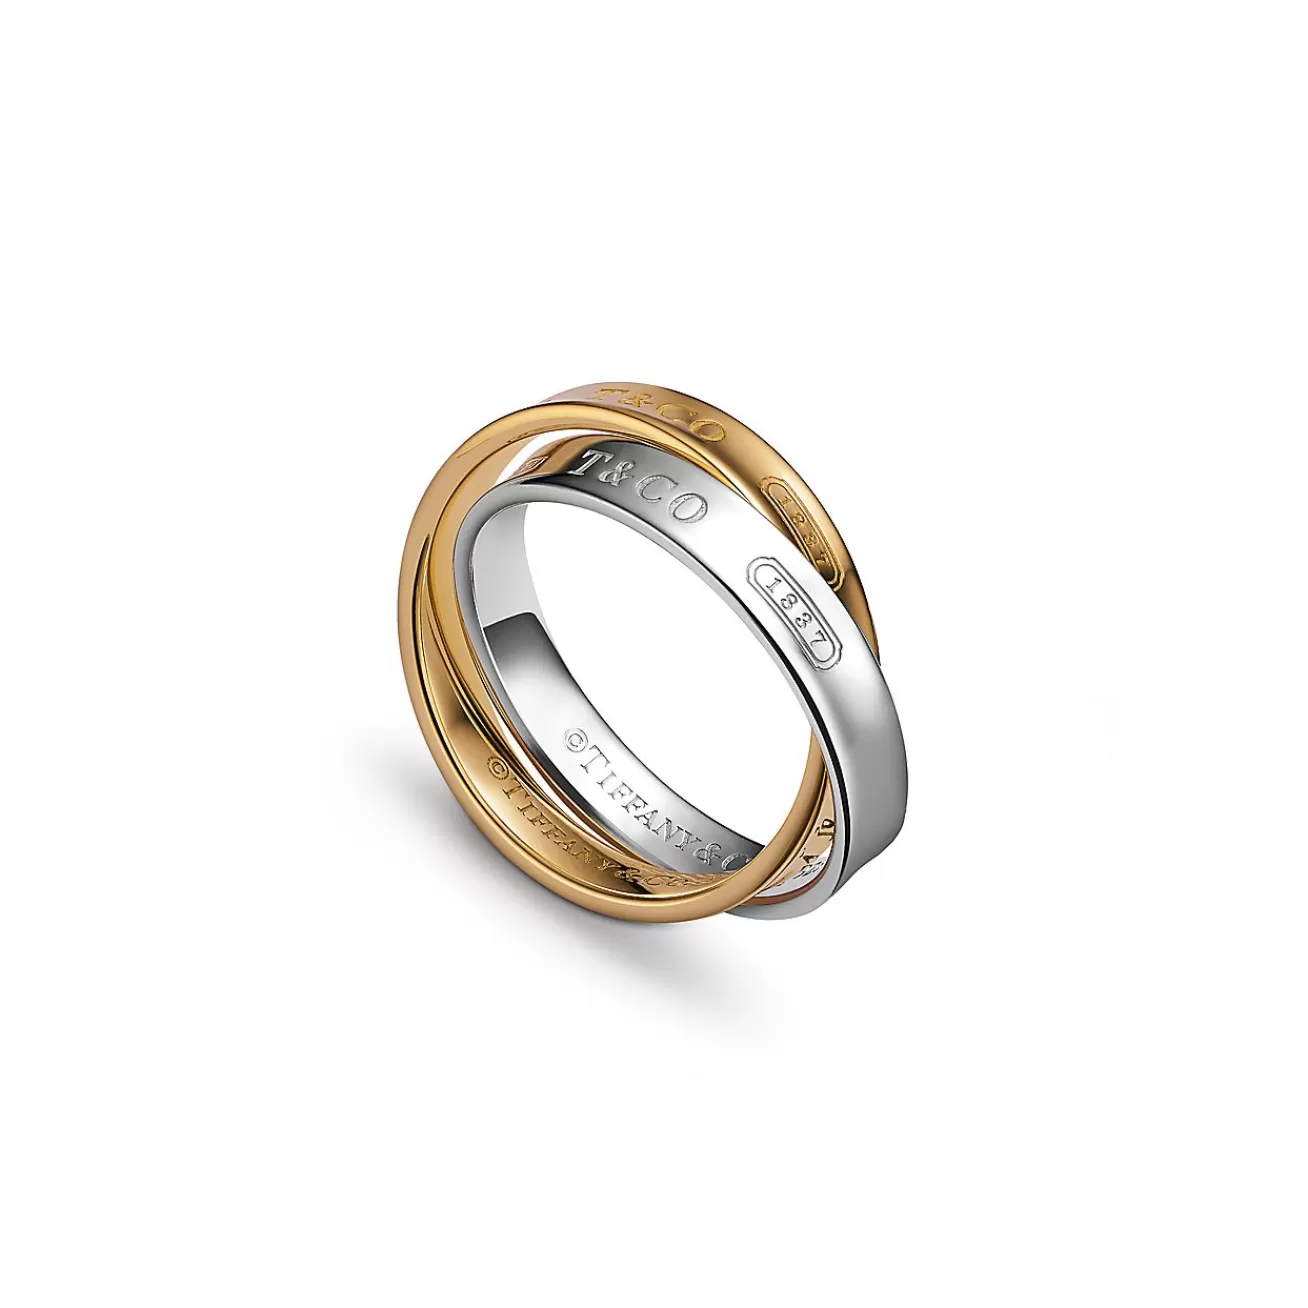 Tiffany & Co. Tiffany 1837® Interlocking Circles Ring in Yellow Gold and Sterling Silver | ^ Rings | Gifts for Her